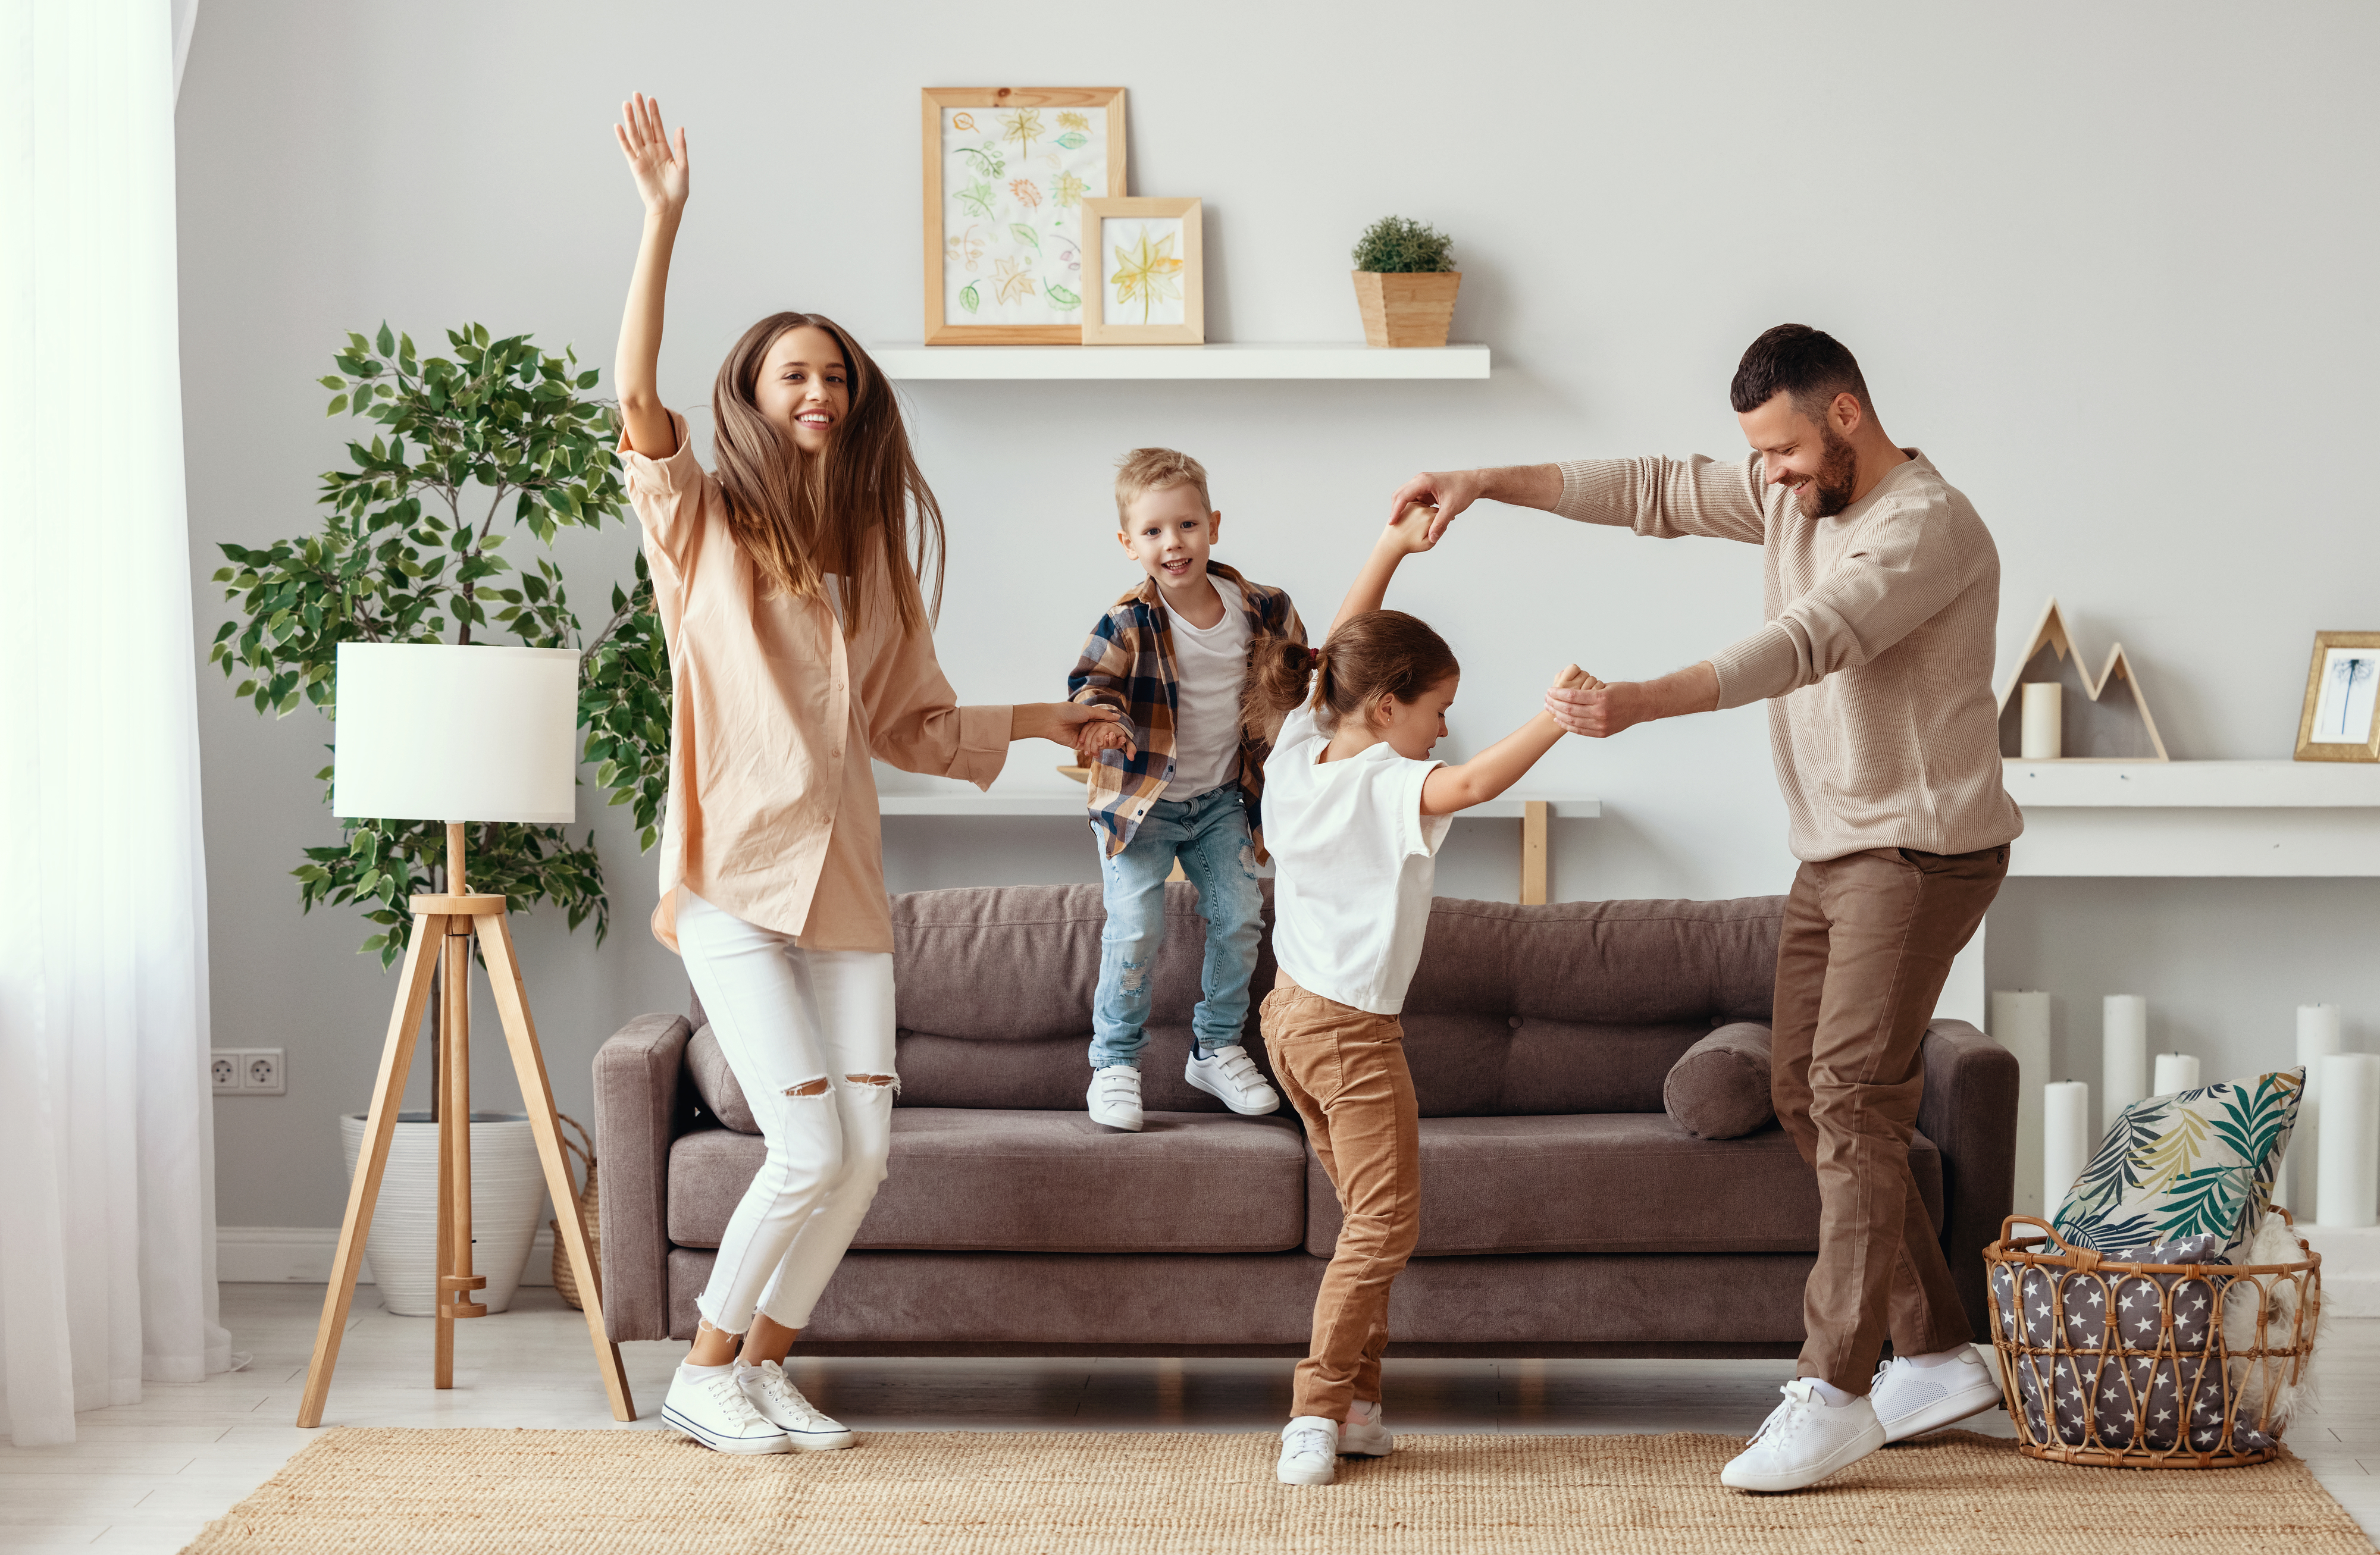 Family of four happily dancing together in a living room